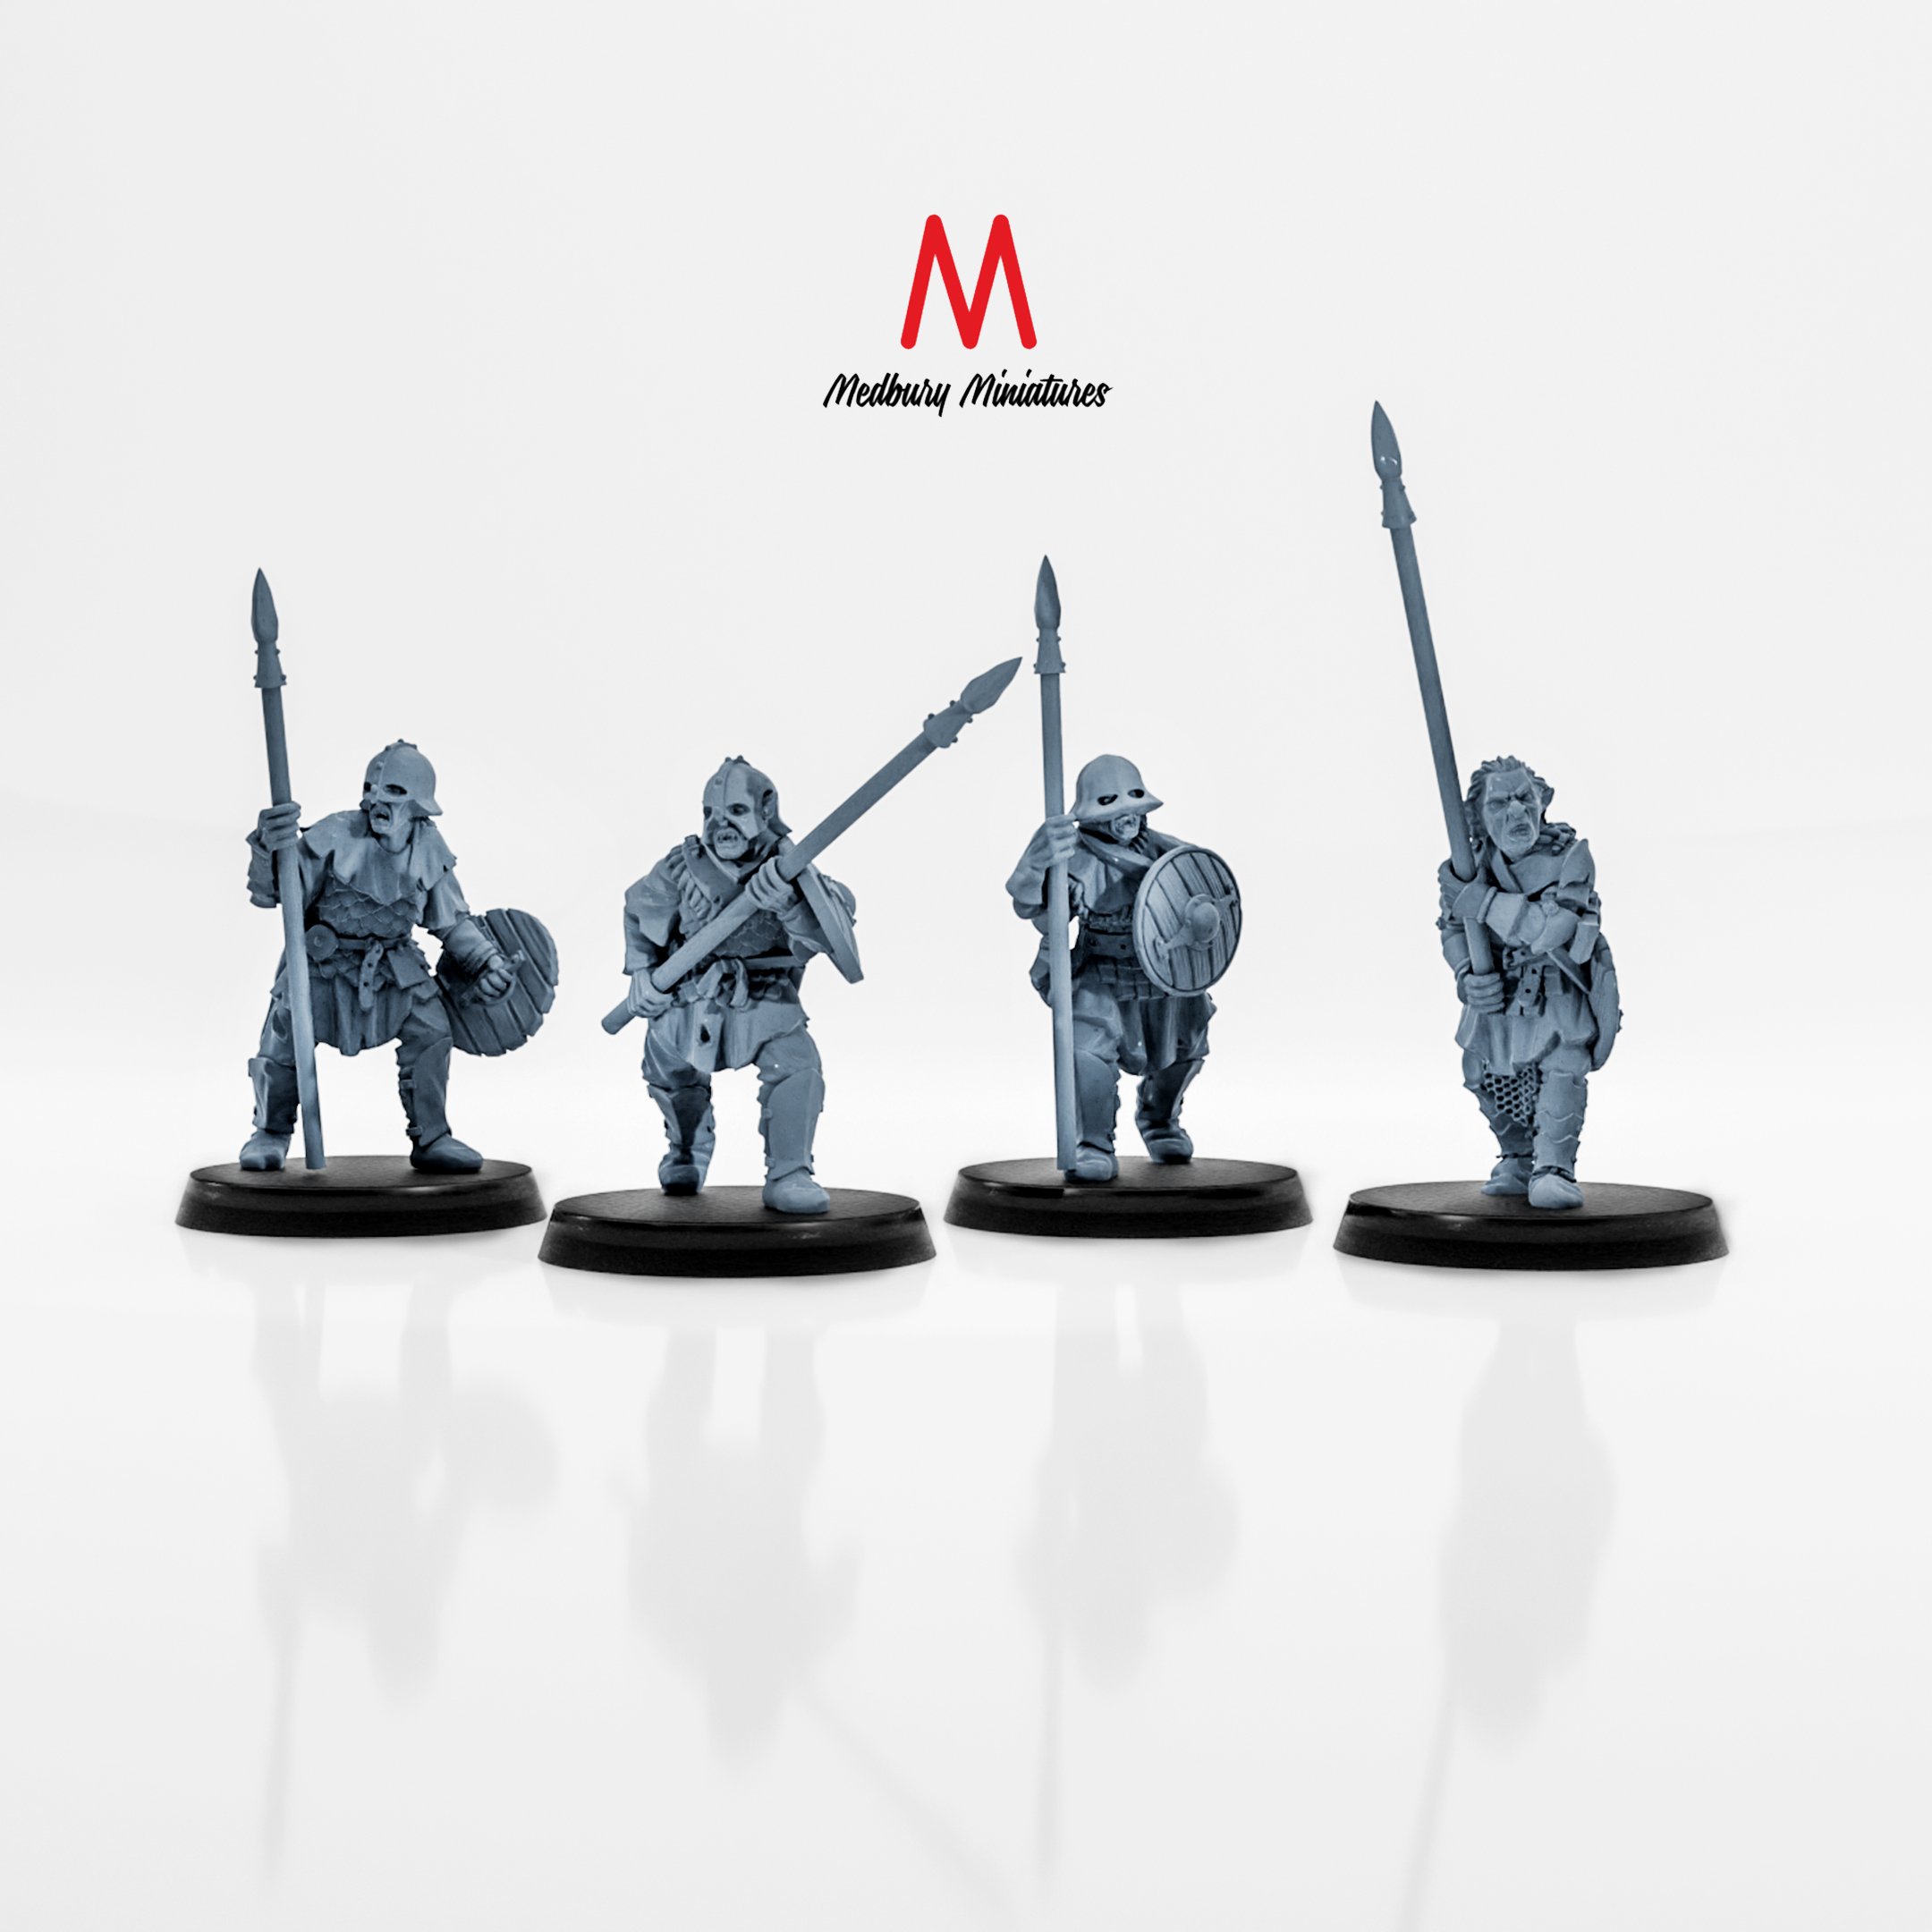 Orcs with Spears and Shields fantasy skirmish wargaming miniatures designed by Medbury Miniatures 3D printed by Forgemaster Miniatures